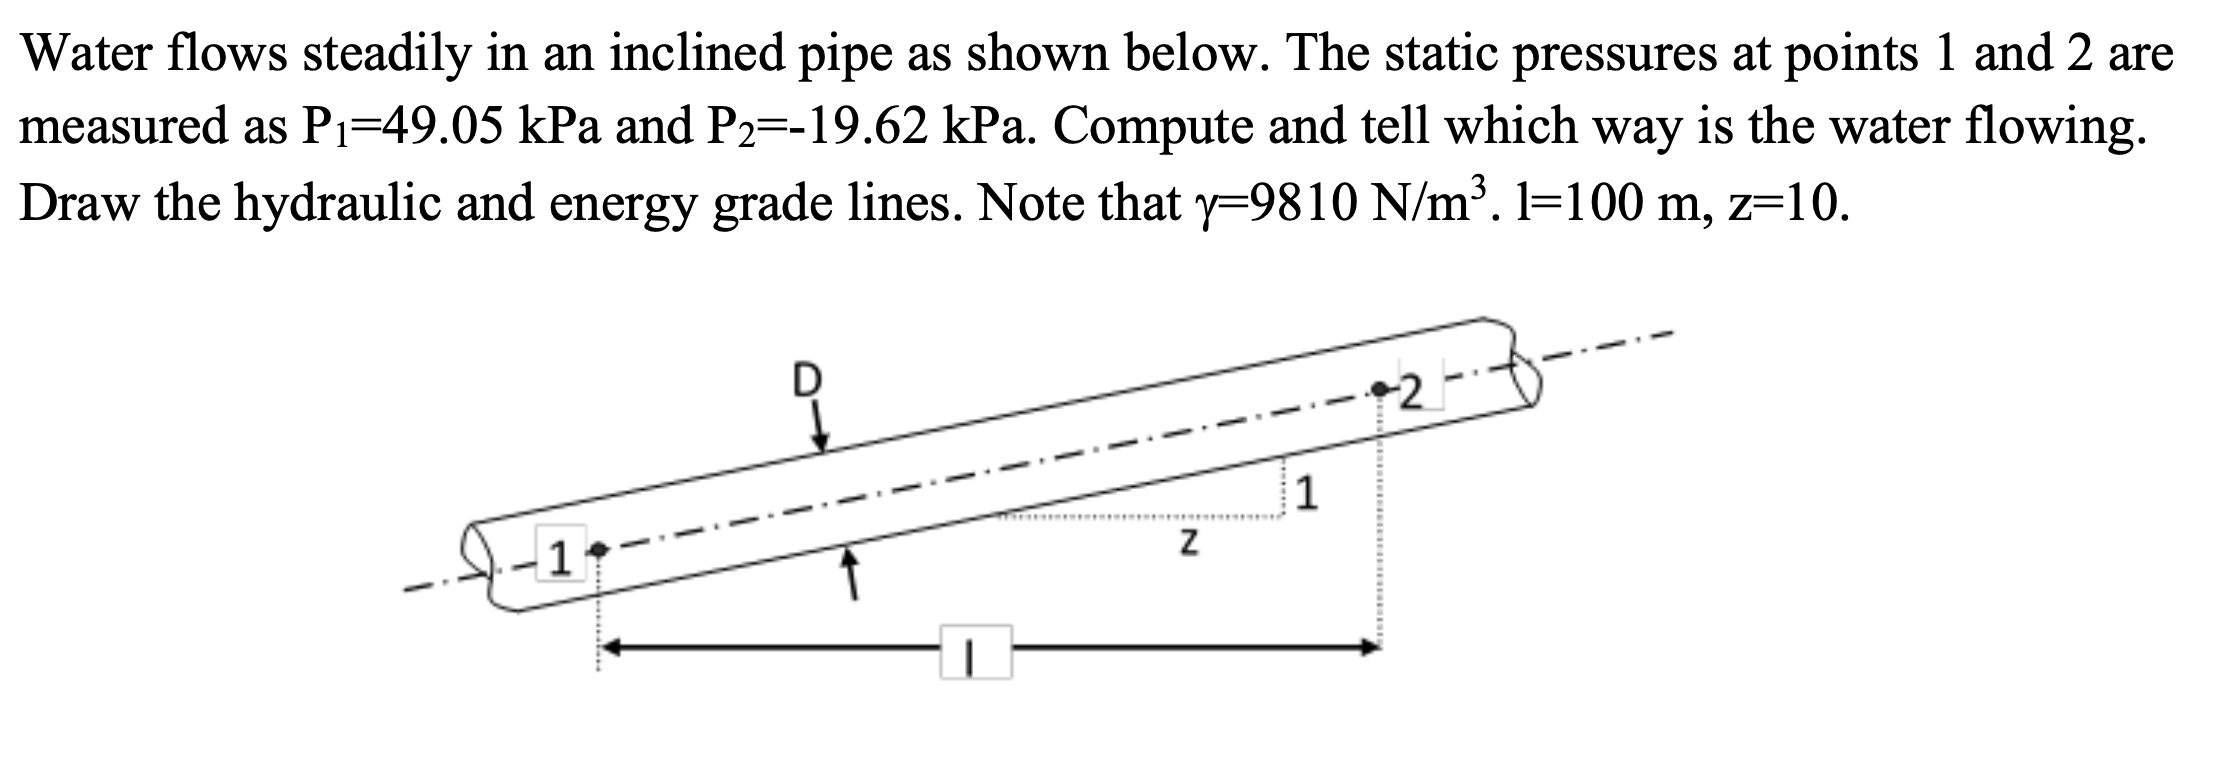 Water flows steadily in an inclined pipe as shown below. The static pressures at points 1 and 2 are measured as P1=49.05 kPa